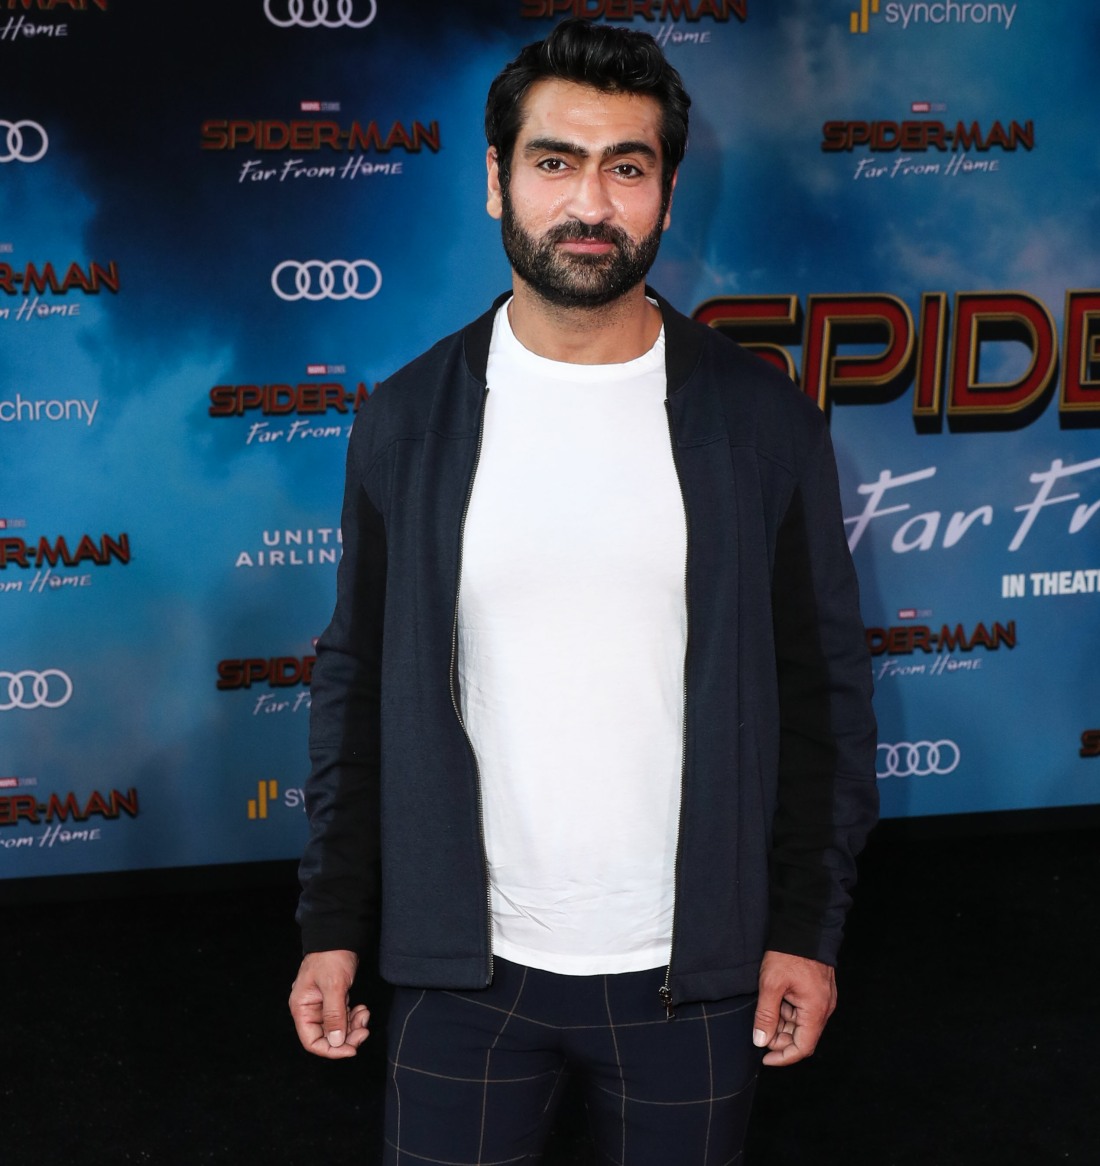 Kumail Nanjiani arrives at the Los Angeles Premiere Of Sony Pictures' 'Spider-Man Far From Home' held at the TCL Chinese Theatre IMAX on June 26, 2019 in Hollywood, Los Angeles, California, United States.